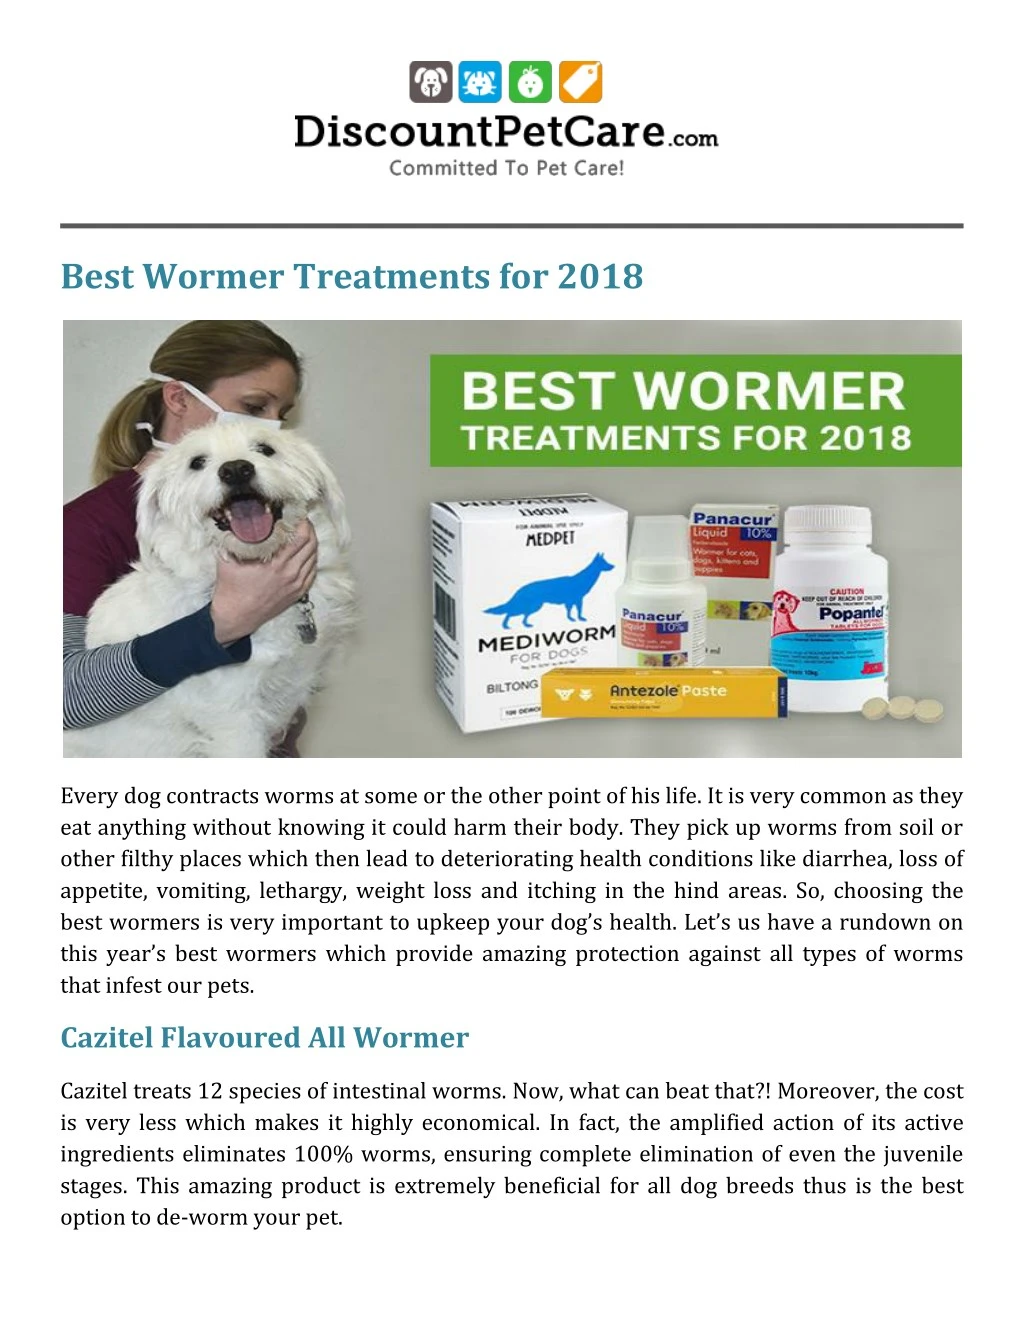 best wormer treatments for 2018